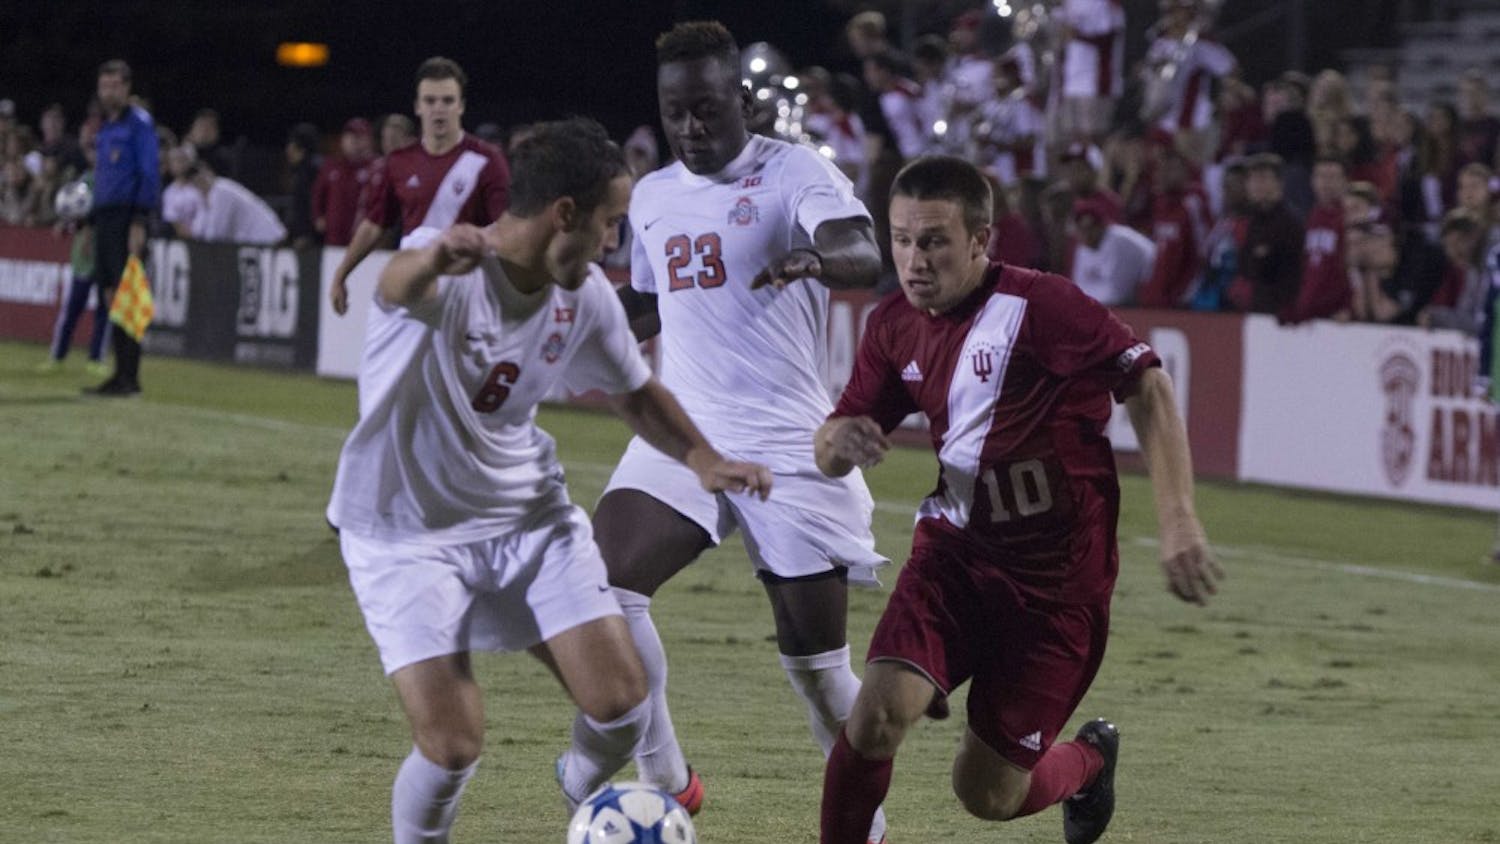 Tanner Thompson moves to pass a defender during the second half of game play against Ohio state on Oct. 10, 2015 at Jerry Yeagley Field. The Hoosiers lost 1-0 in overtime.